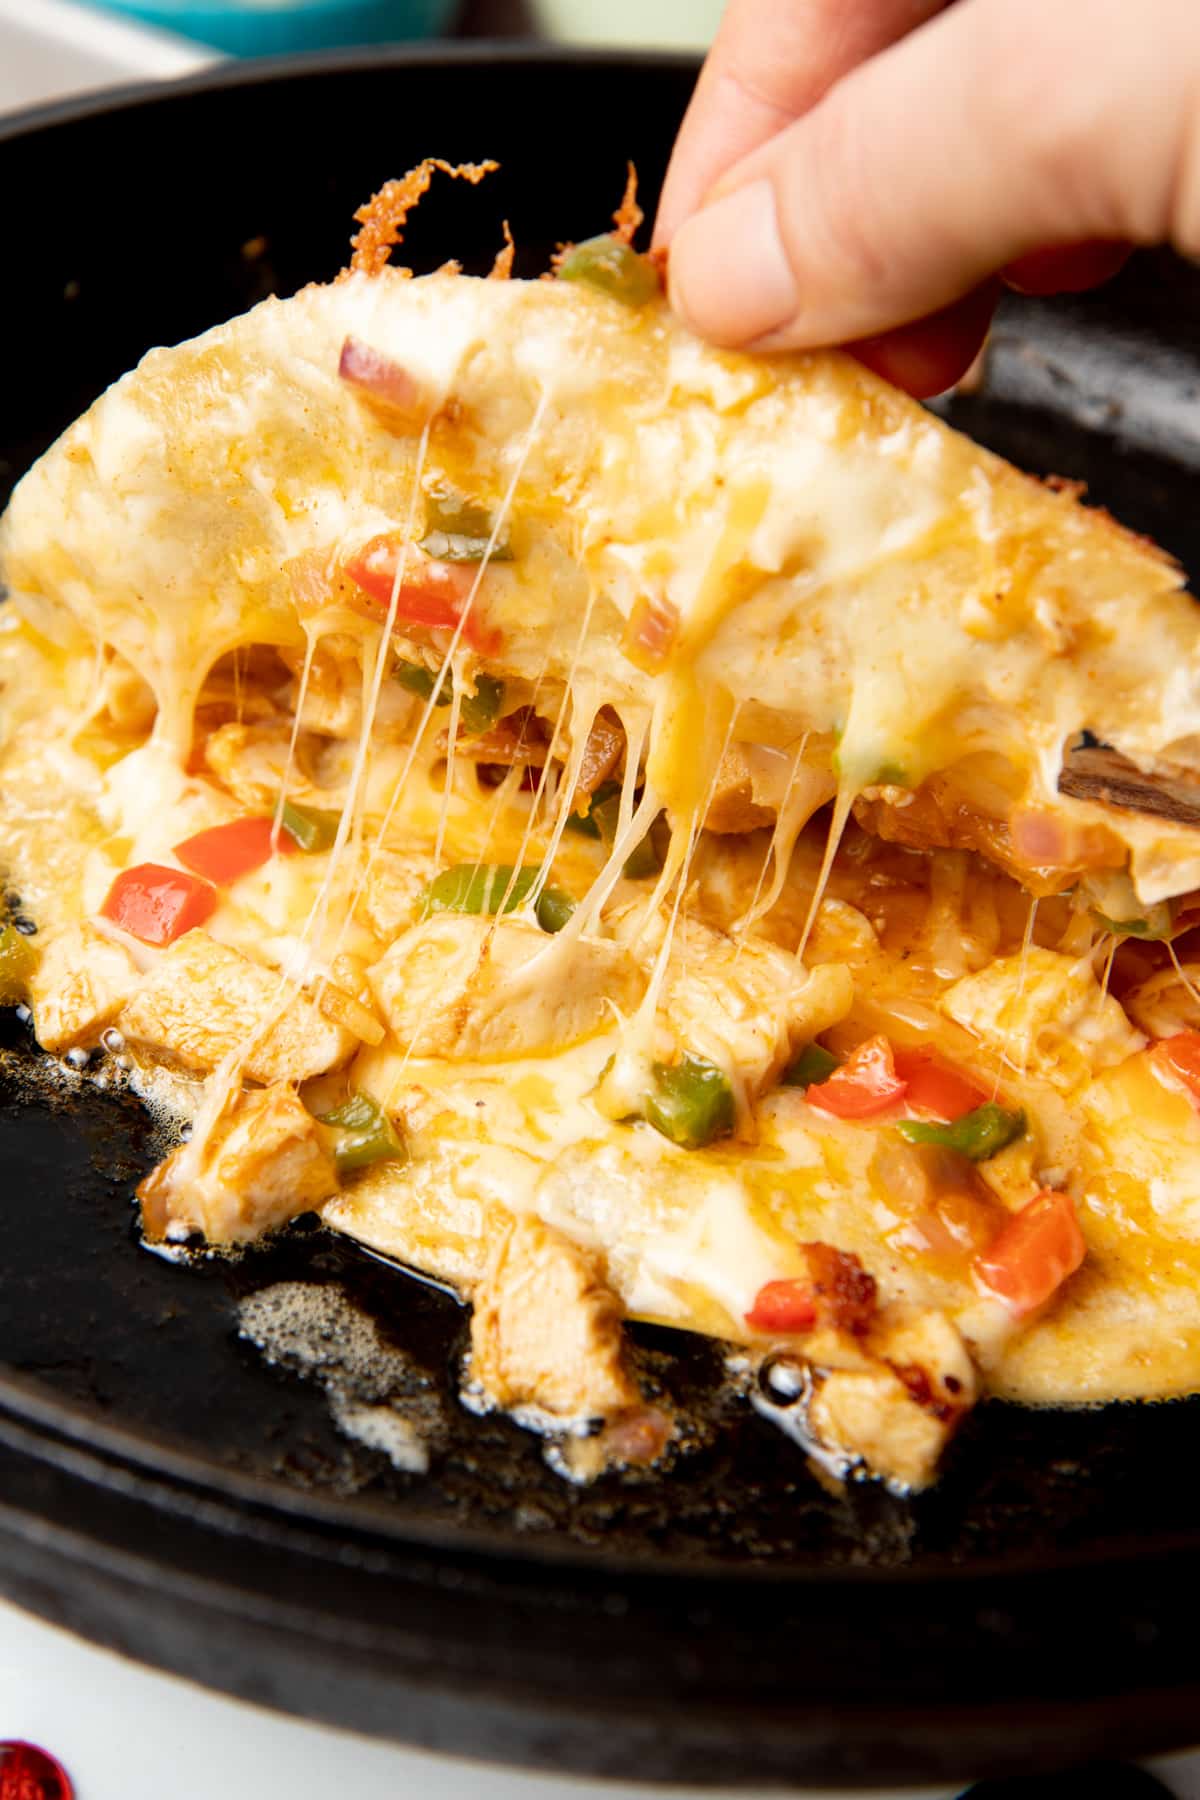 A hand lifts the top of a folded quesadilla. Chicken, peppers, and cheese are inside.